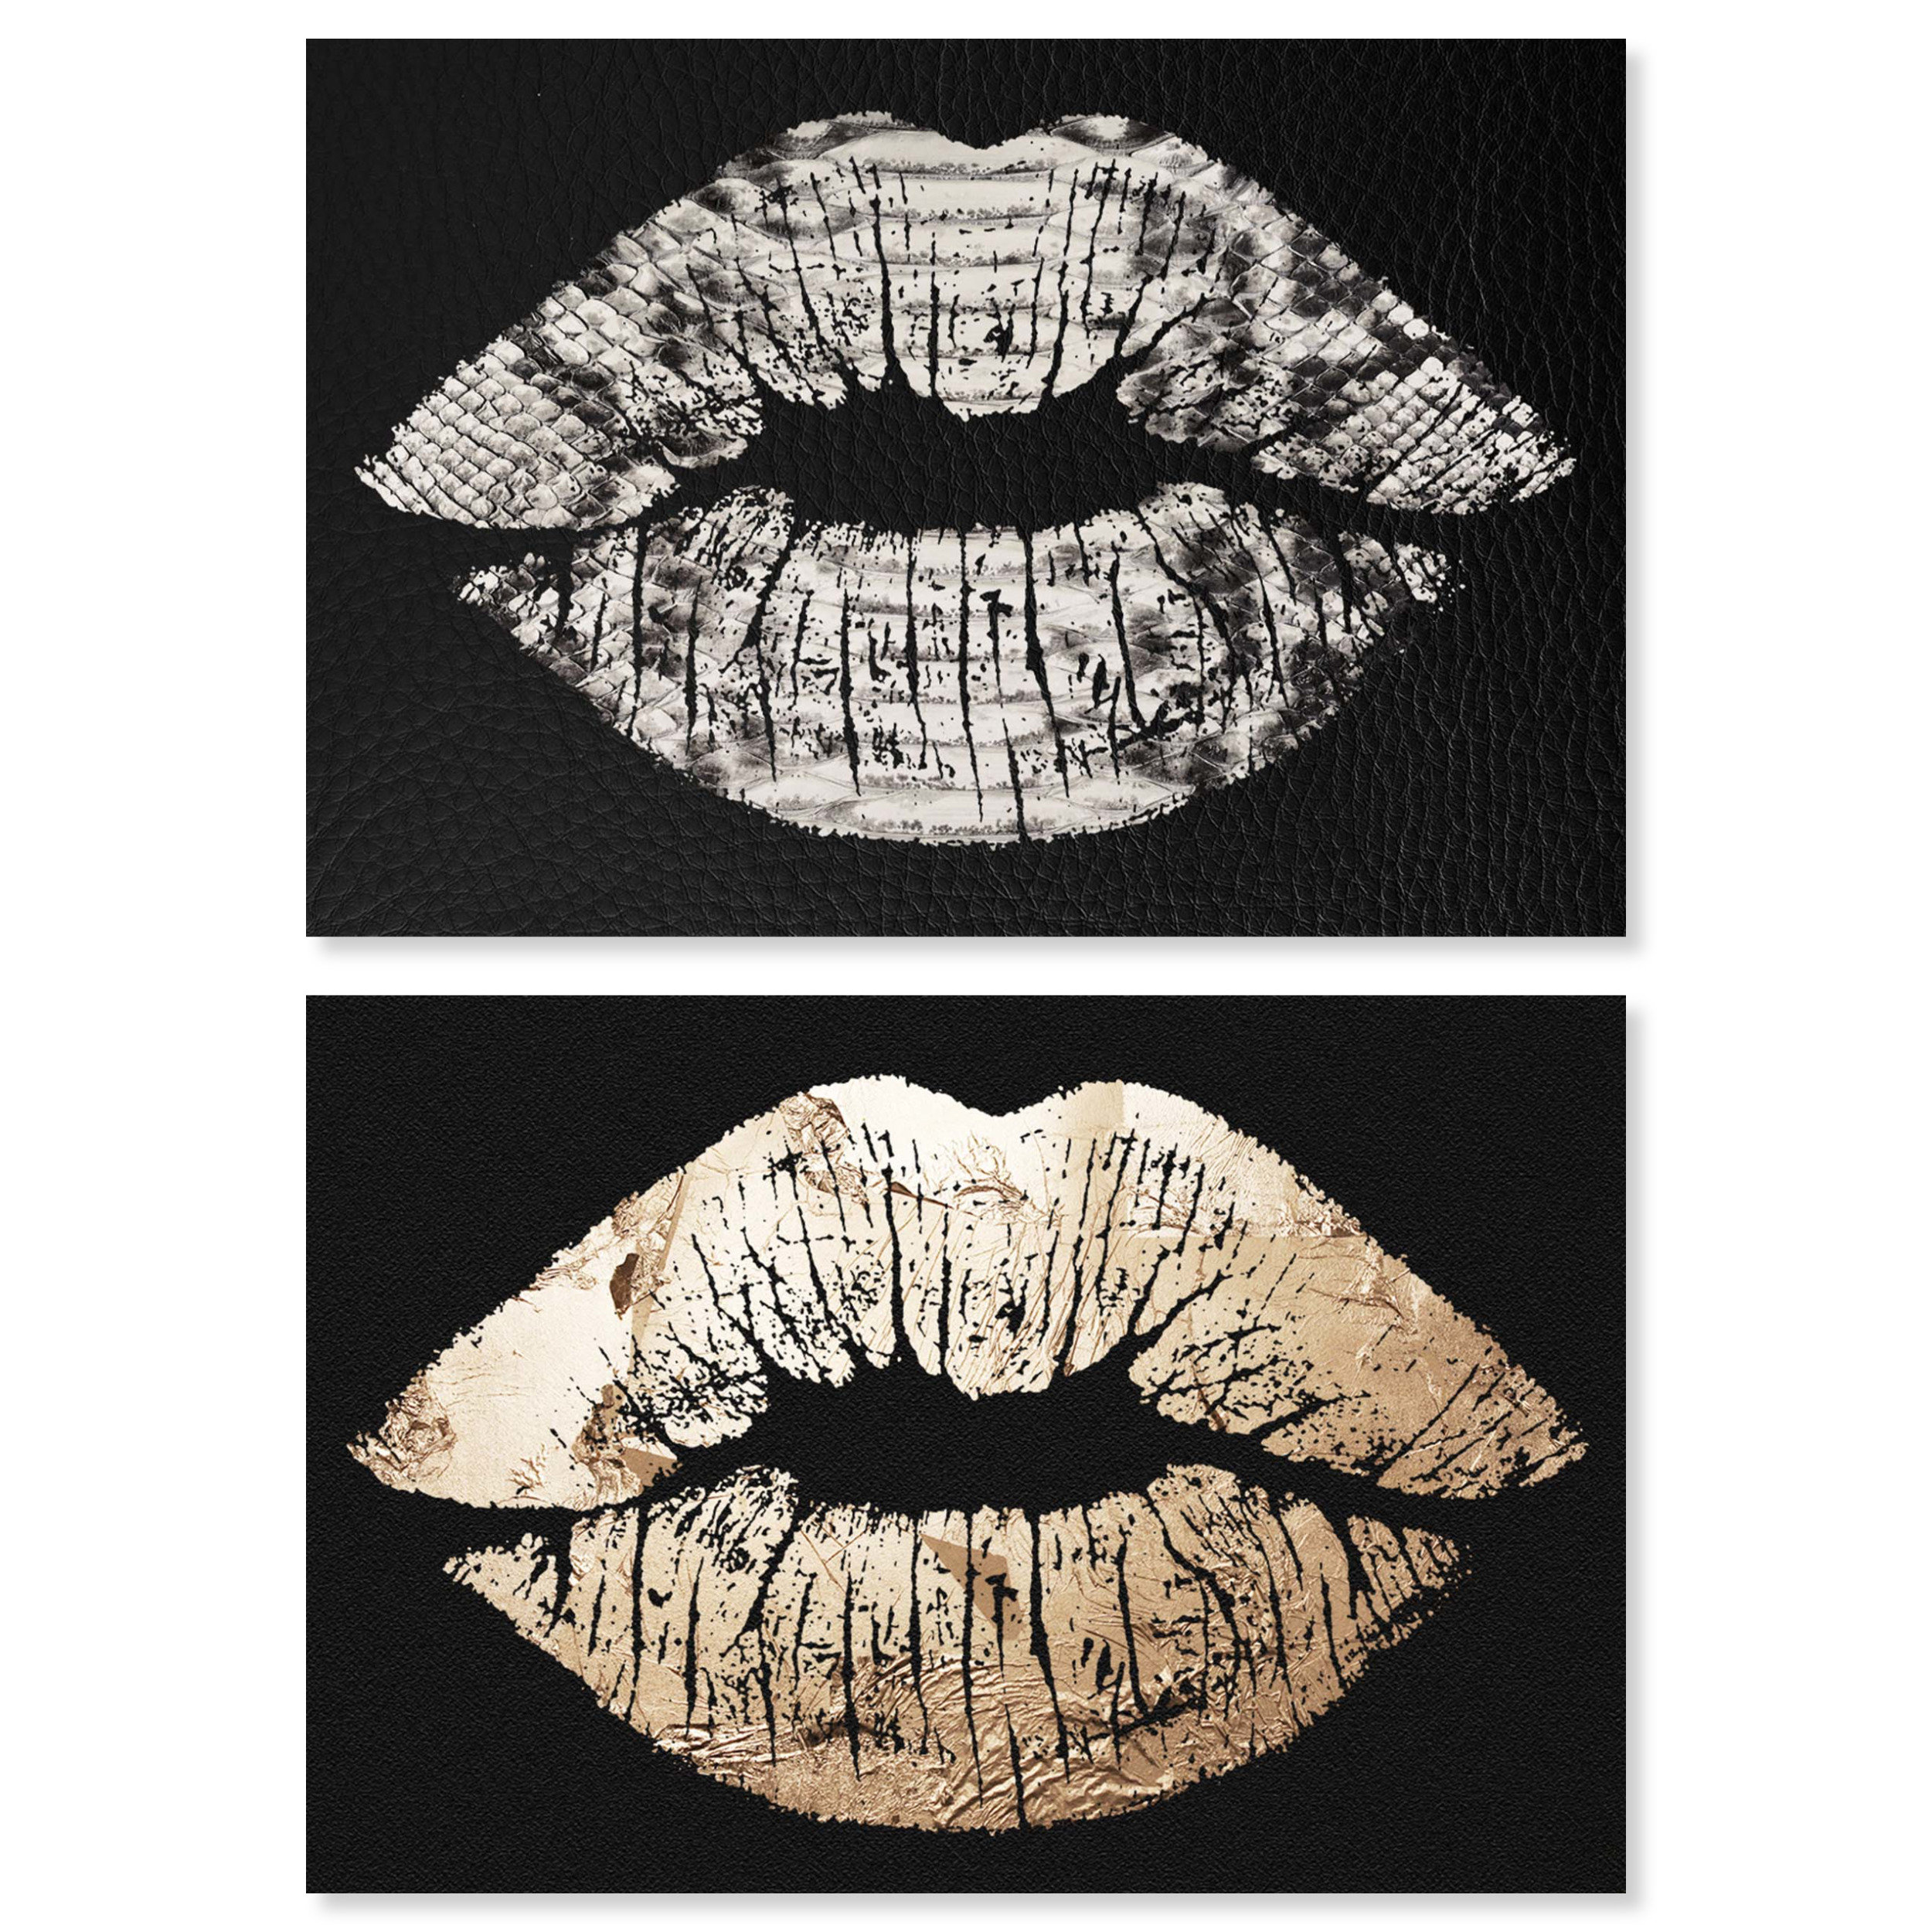 Wall Decor, Louis Vuitton With Chanel Logo Lips Canvas Wall Art Designed  By Oliver Gal